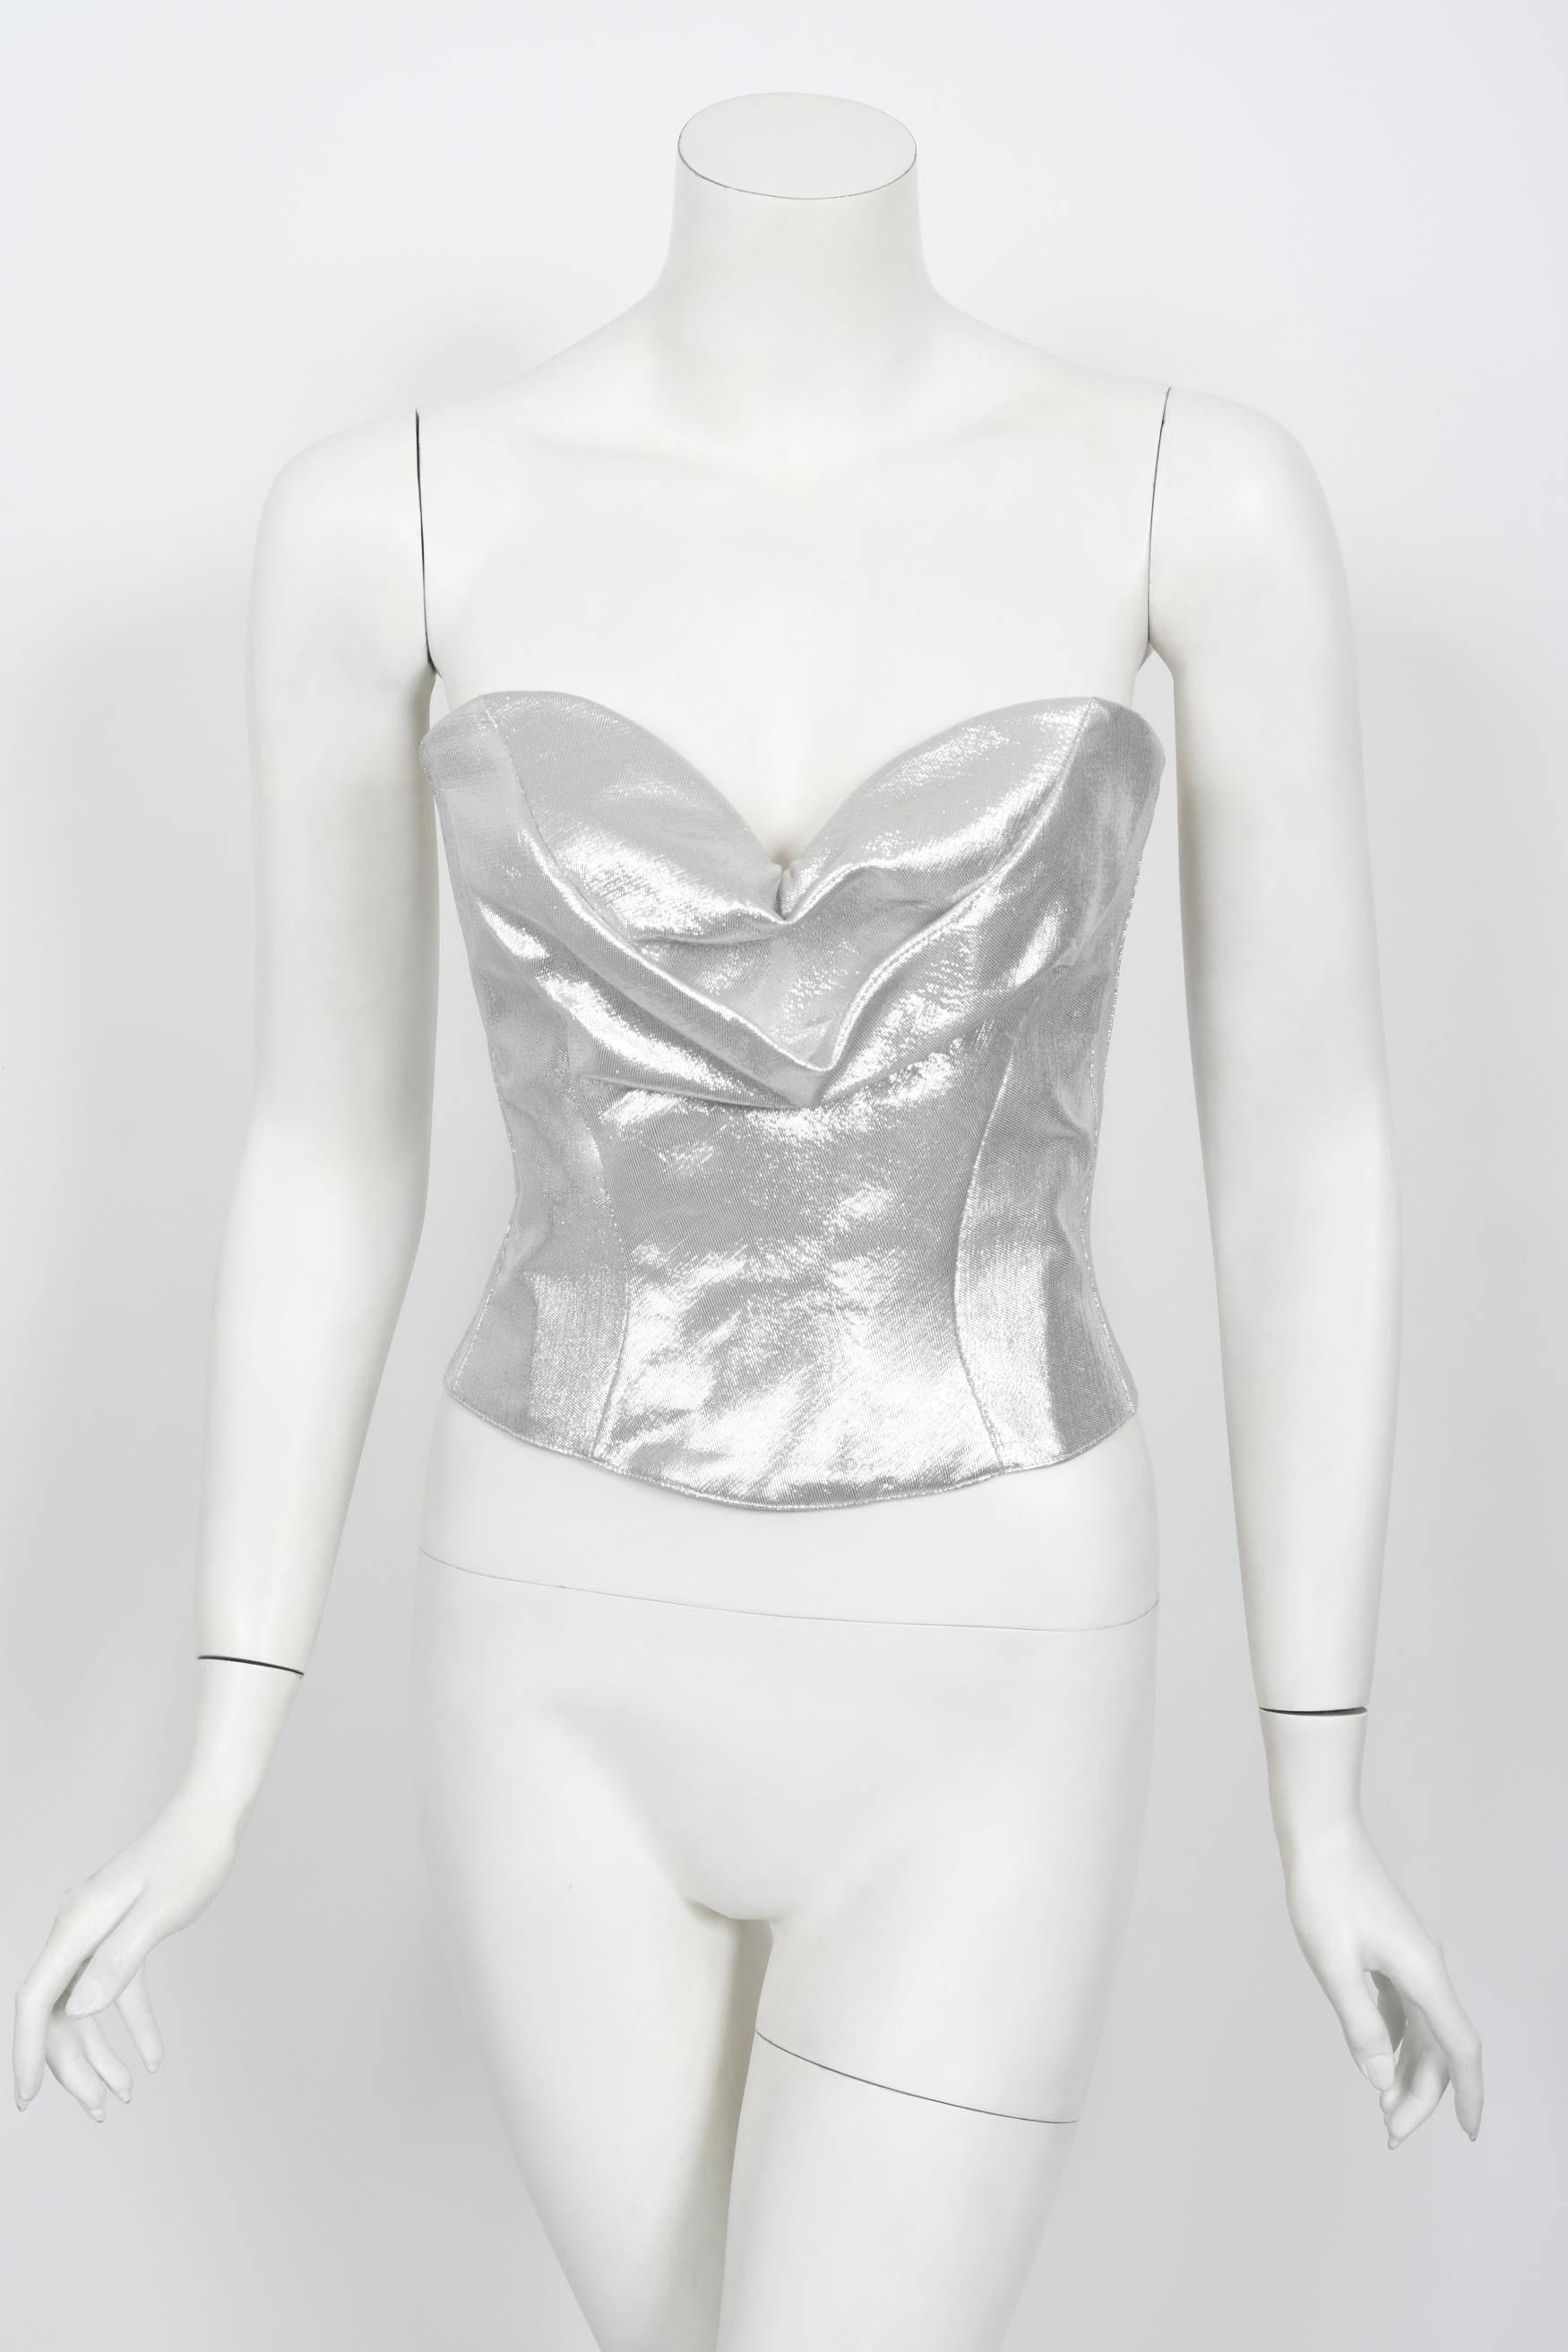 Iconic 1992 Thierry Mugler Couture Metallic Silver Blue Bustier Mini Skirt Suit For Sale 10